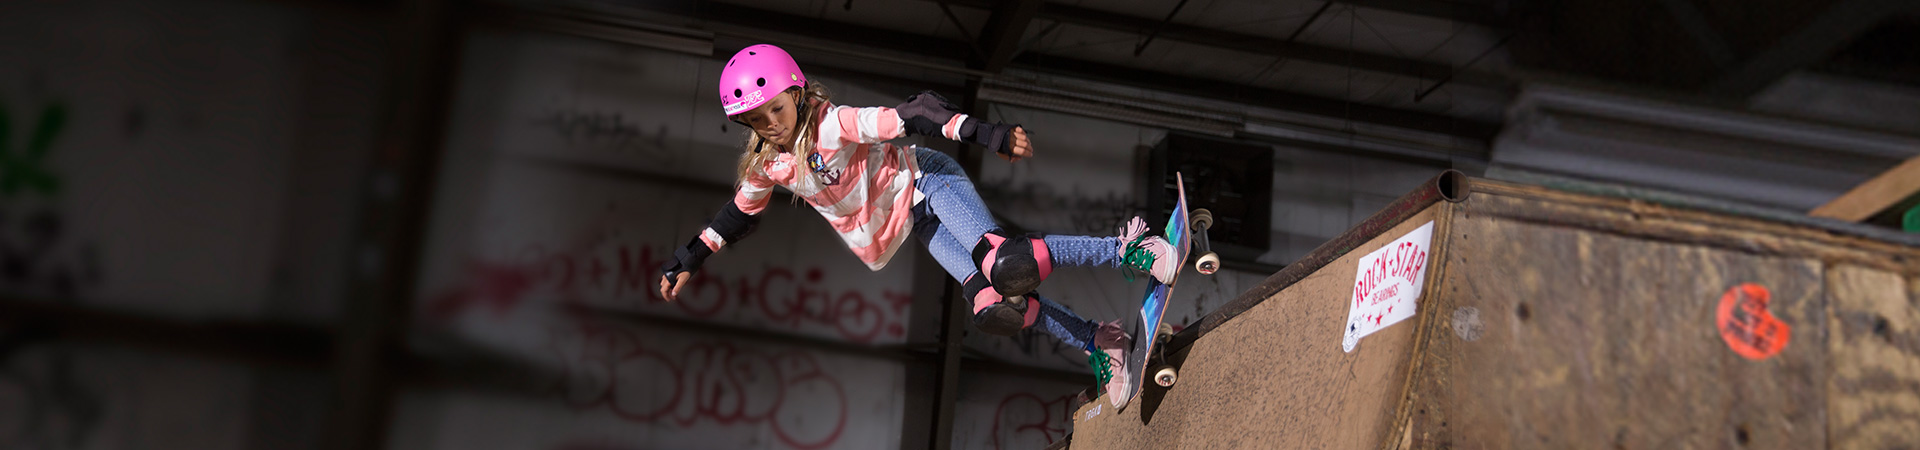  young girl on skateboard at top of ramp with pink helmet elbow and knee pads 